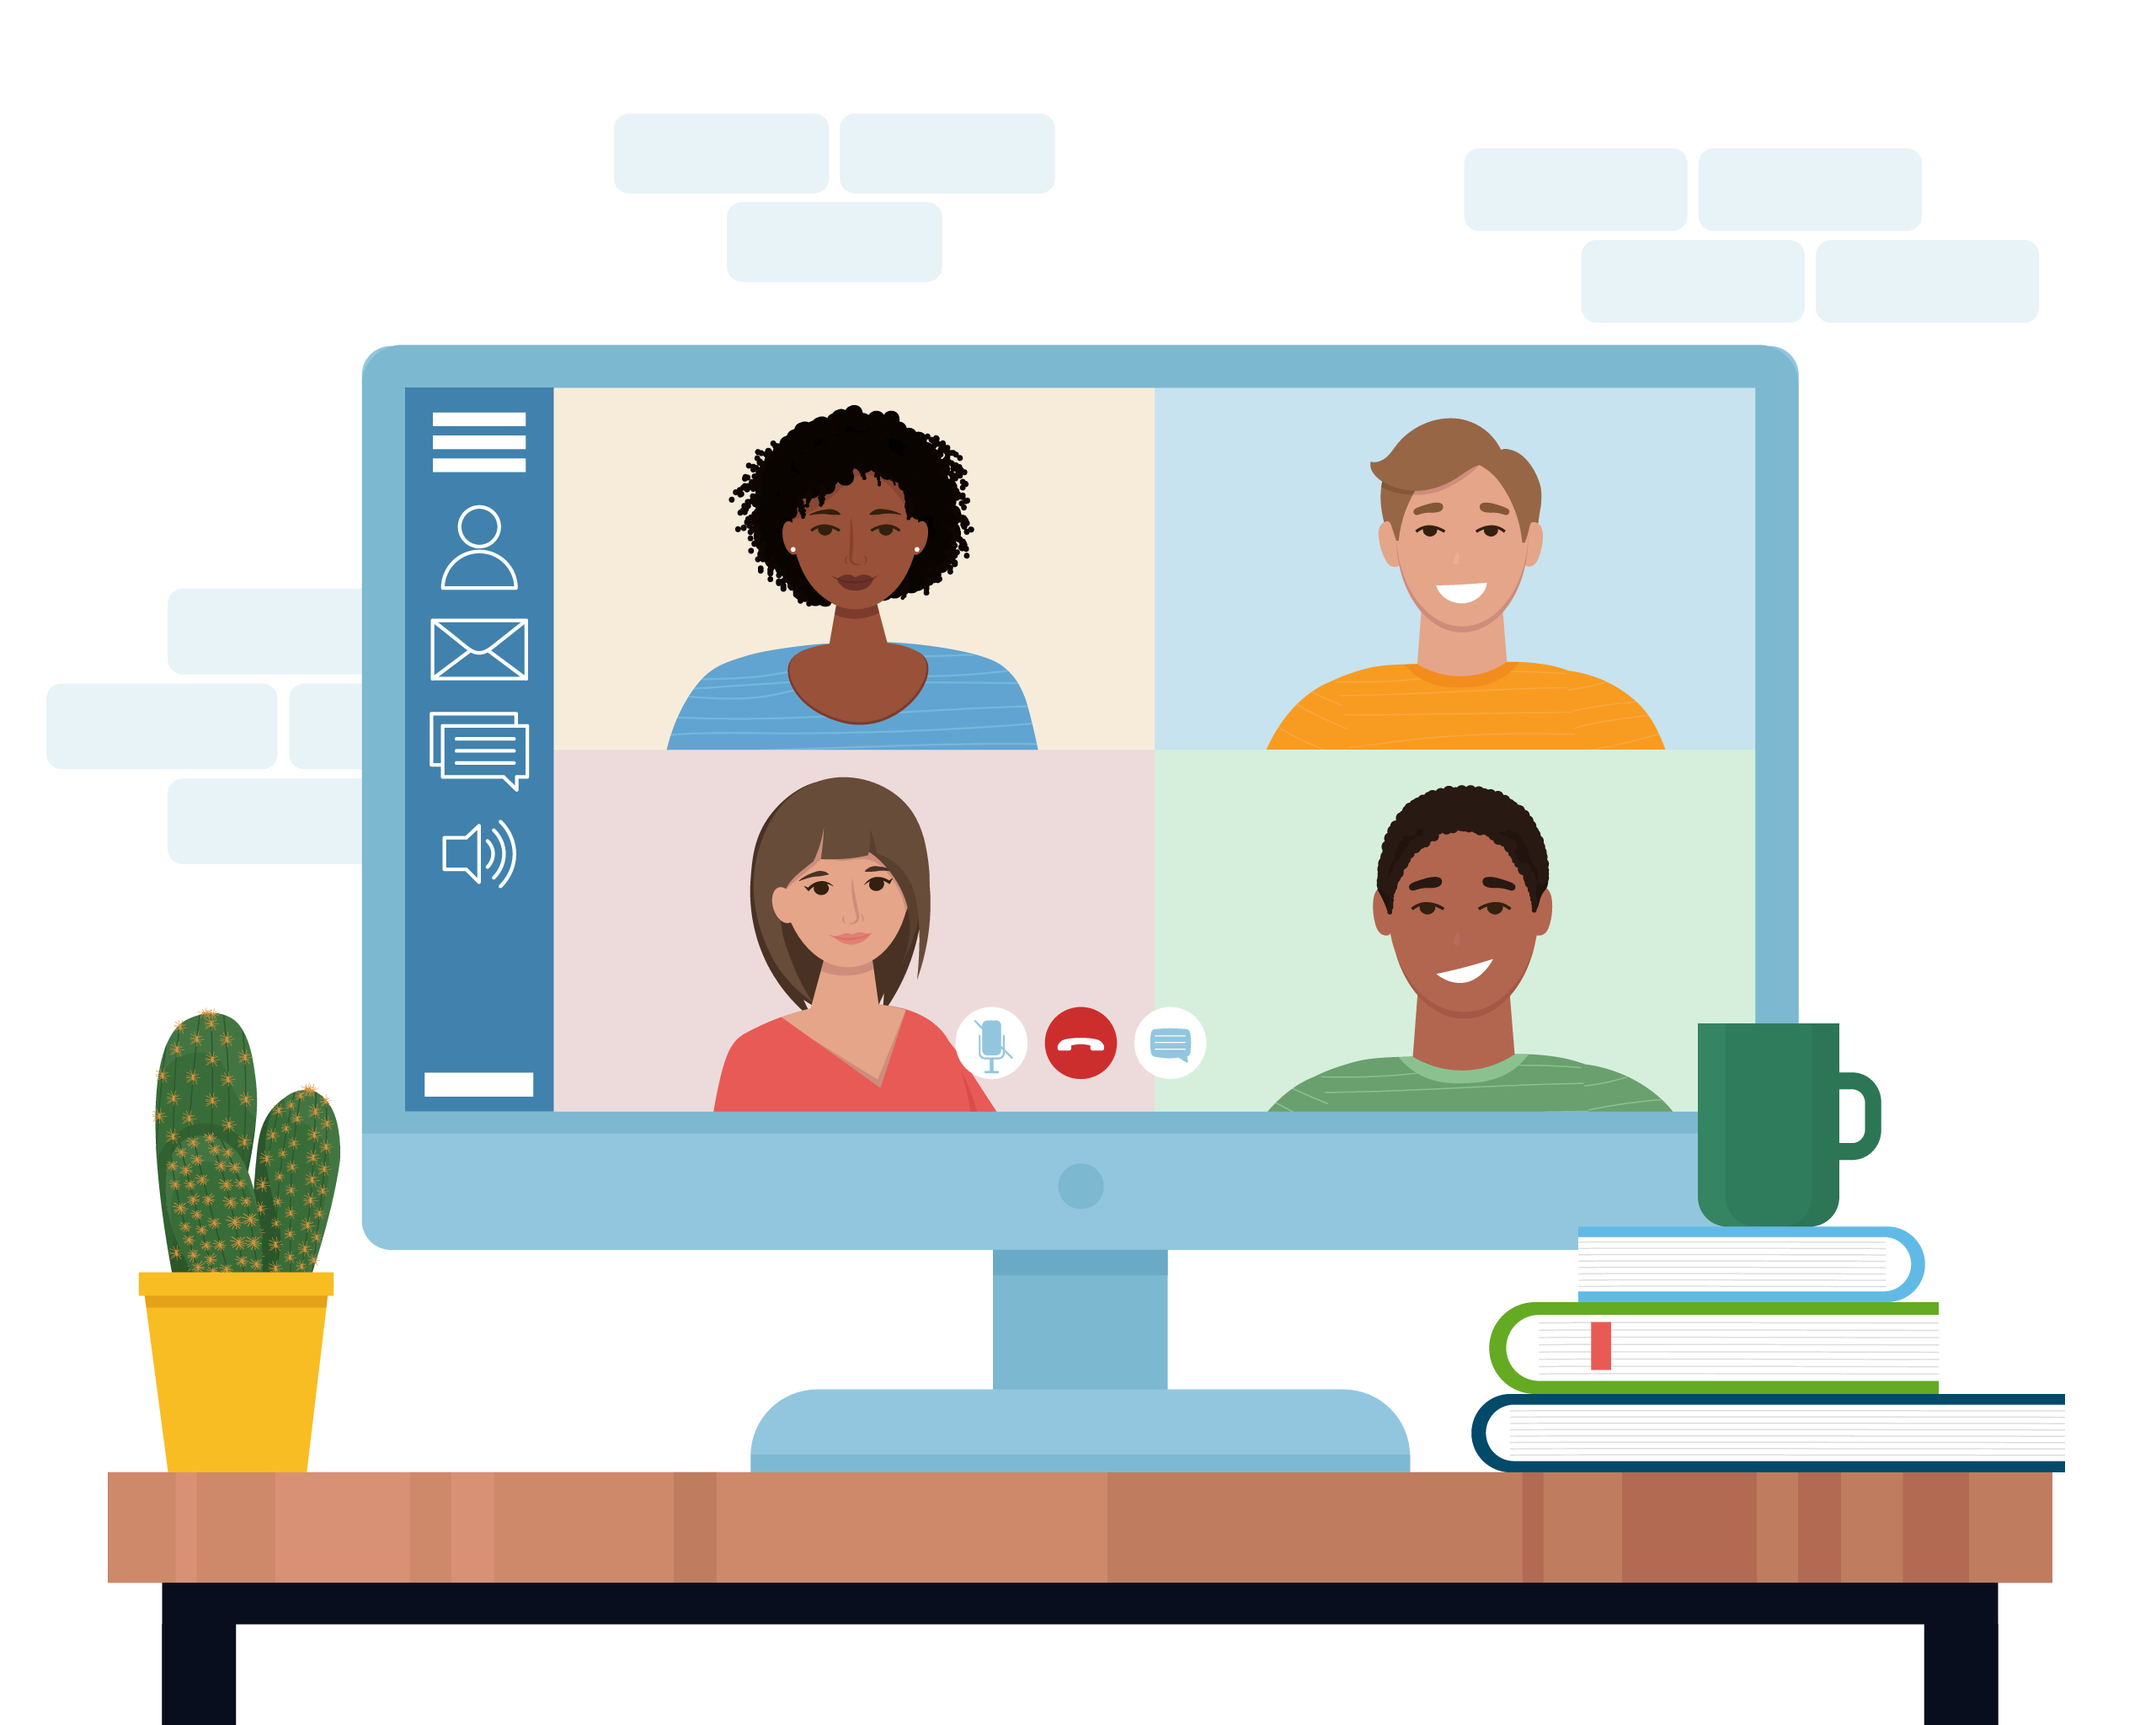 Video,Conference,With,People,Group.,Computer,Screen.,Vector,Illustration,In